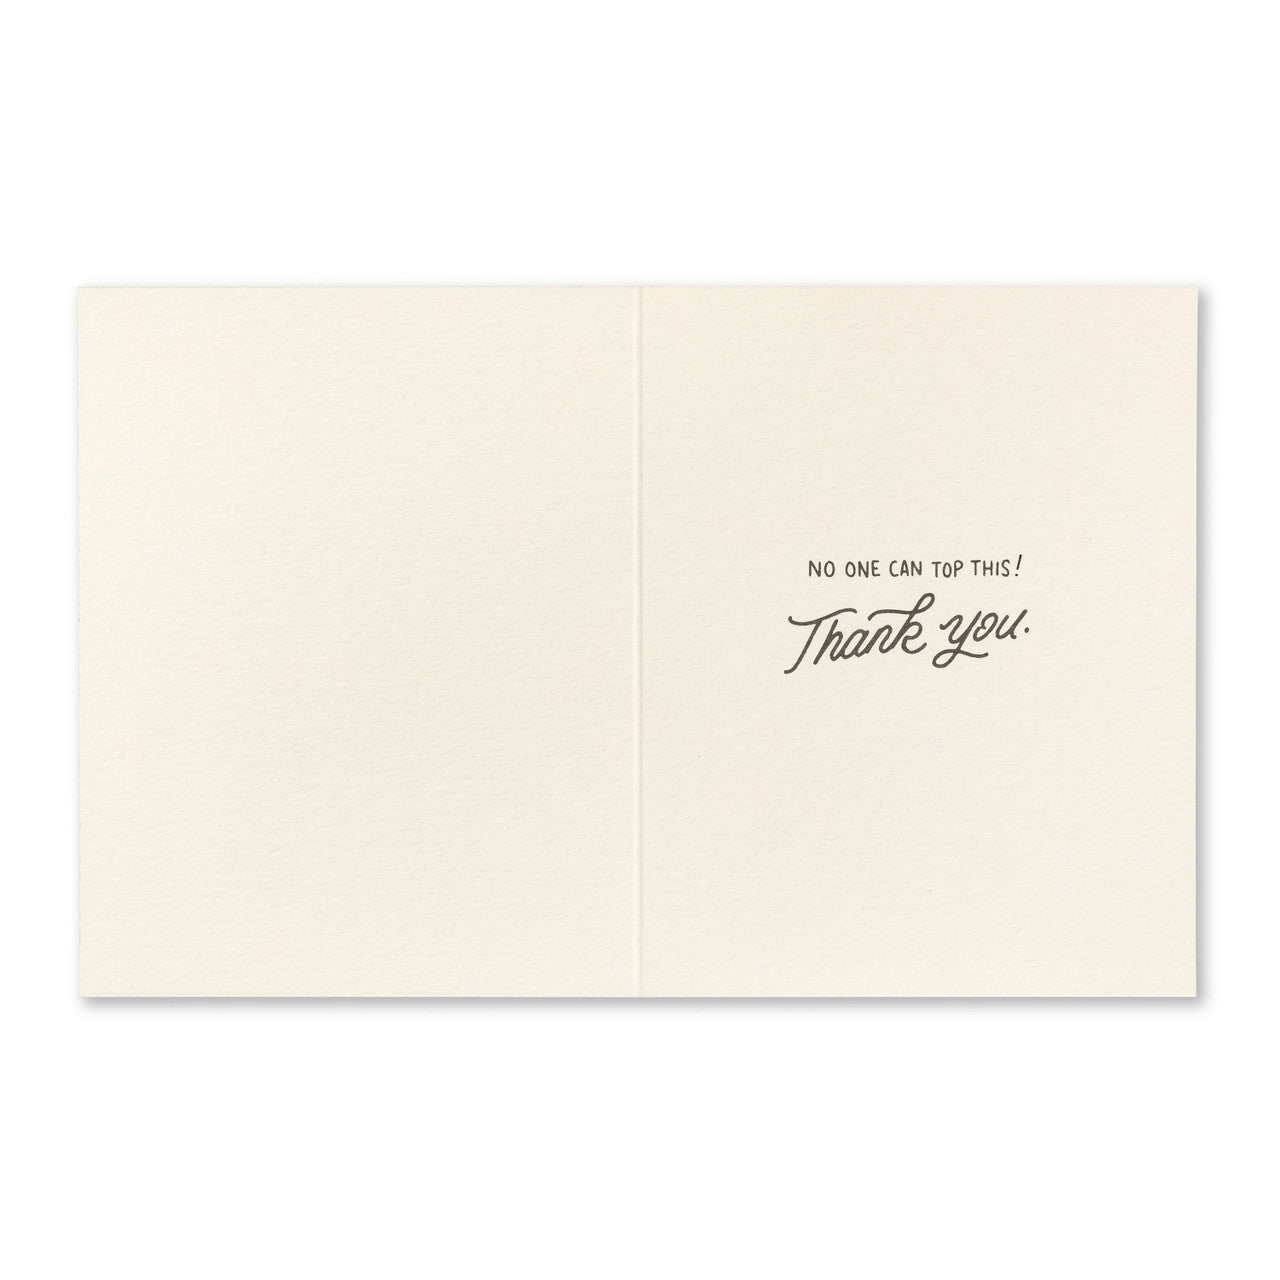 Love Muchly (TY) Thank you Card:  Well, Dang